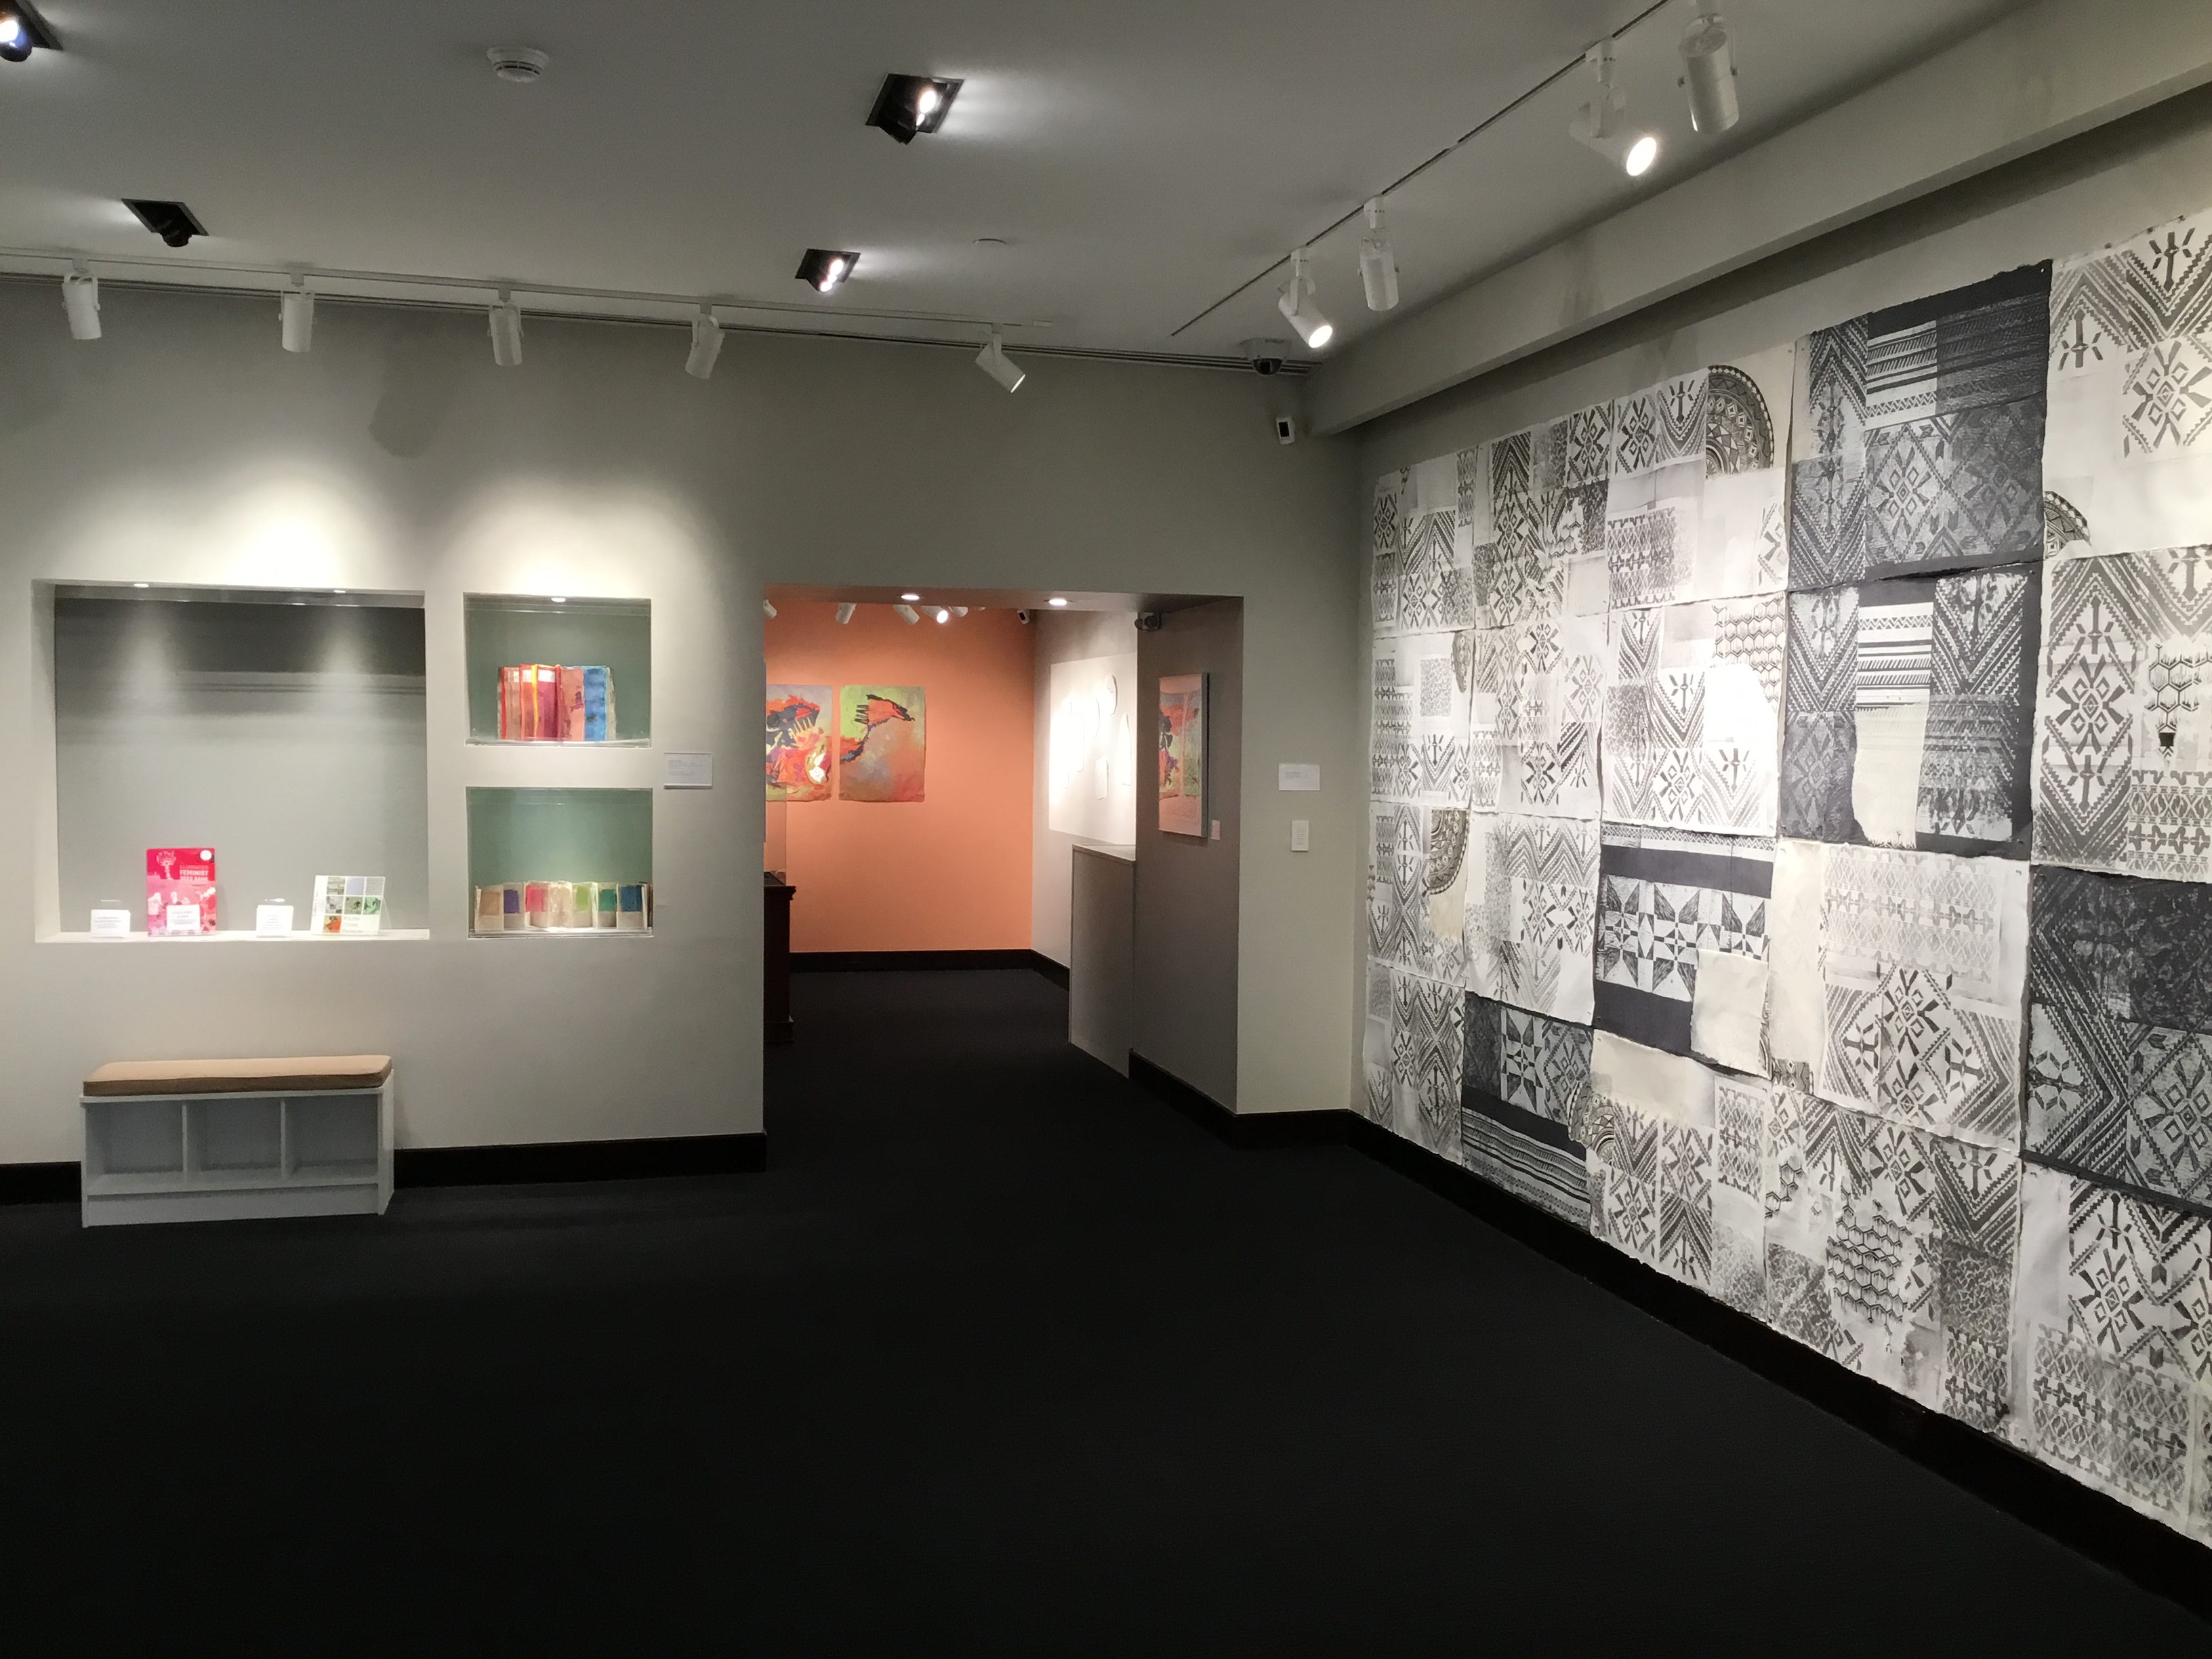 The right wall of the first room, leading into the back room. The wall is covered in sheets of black and white patterned paper cut and pasted together.